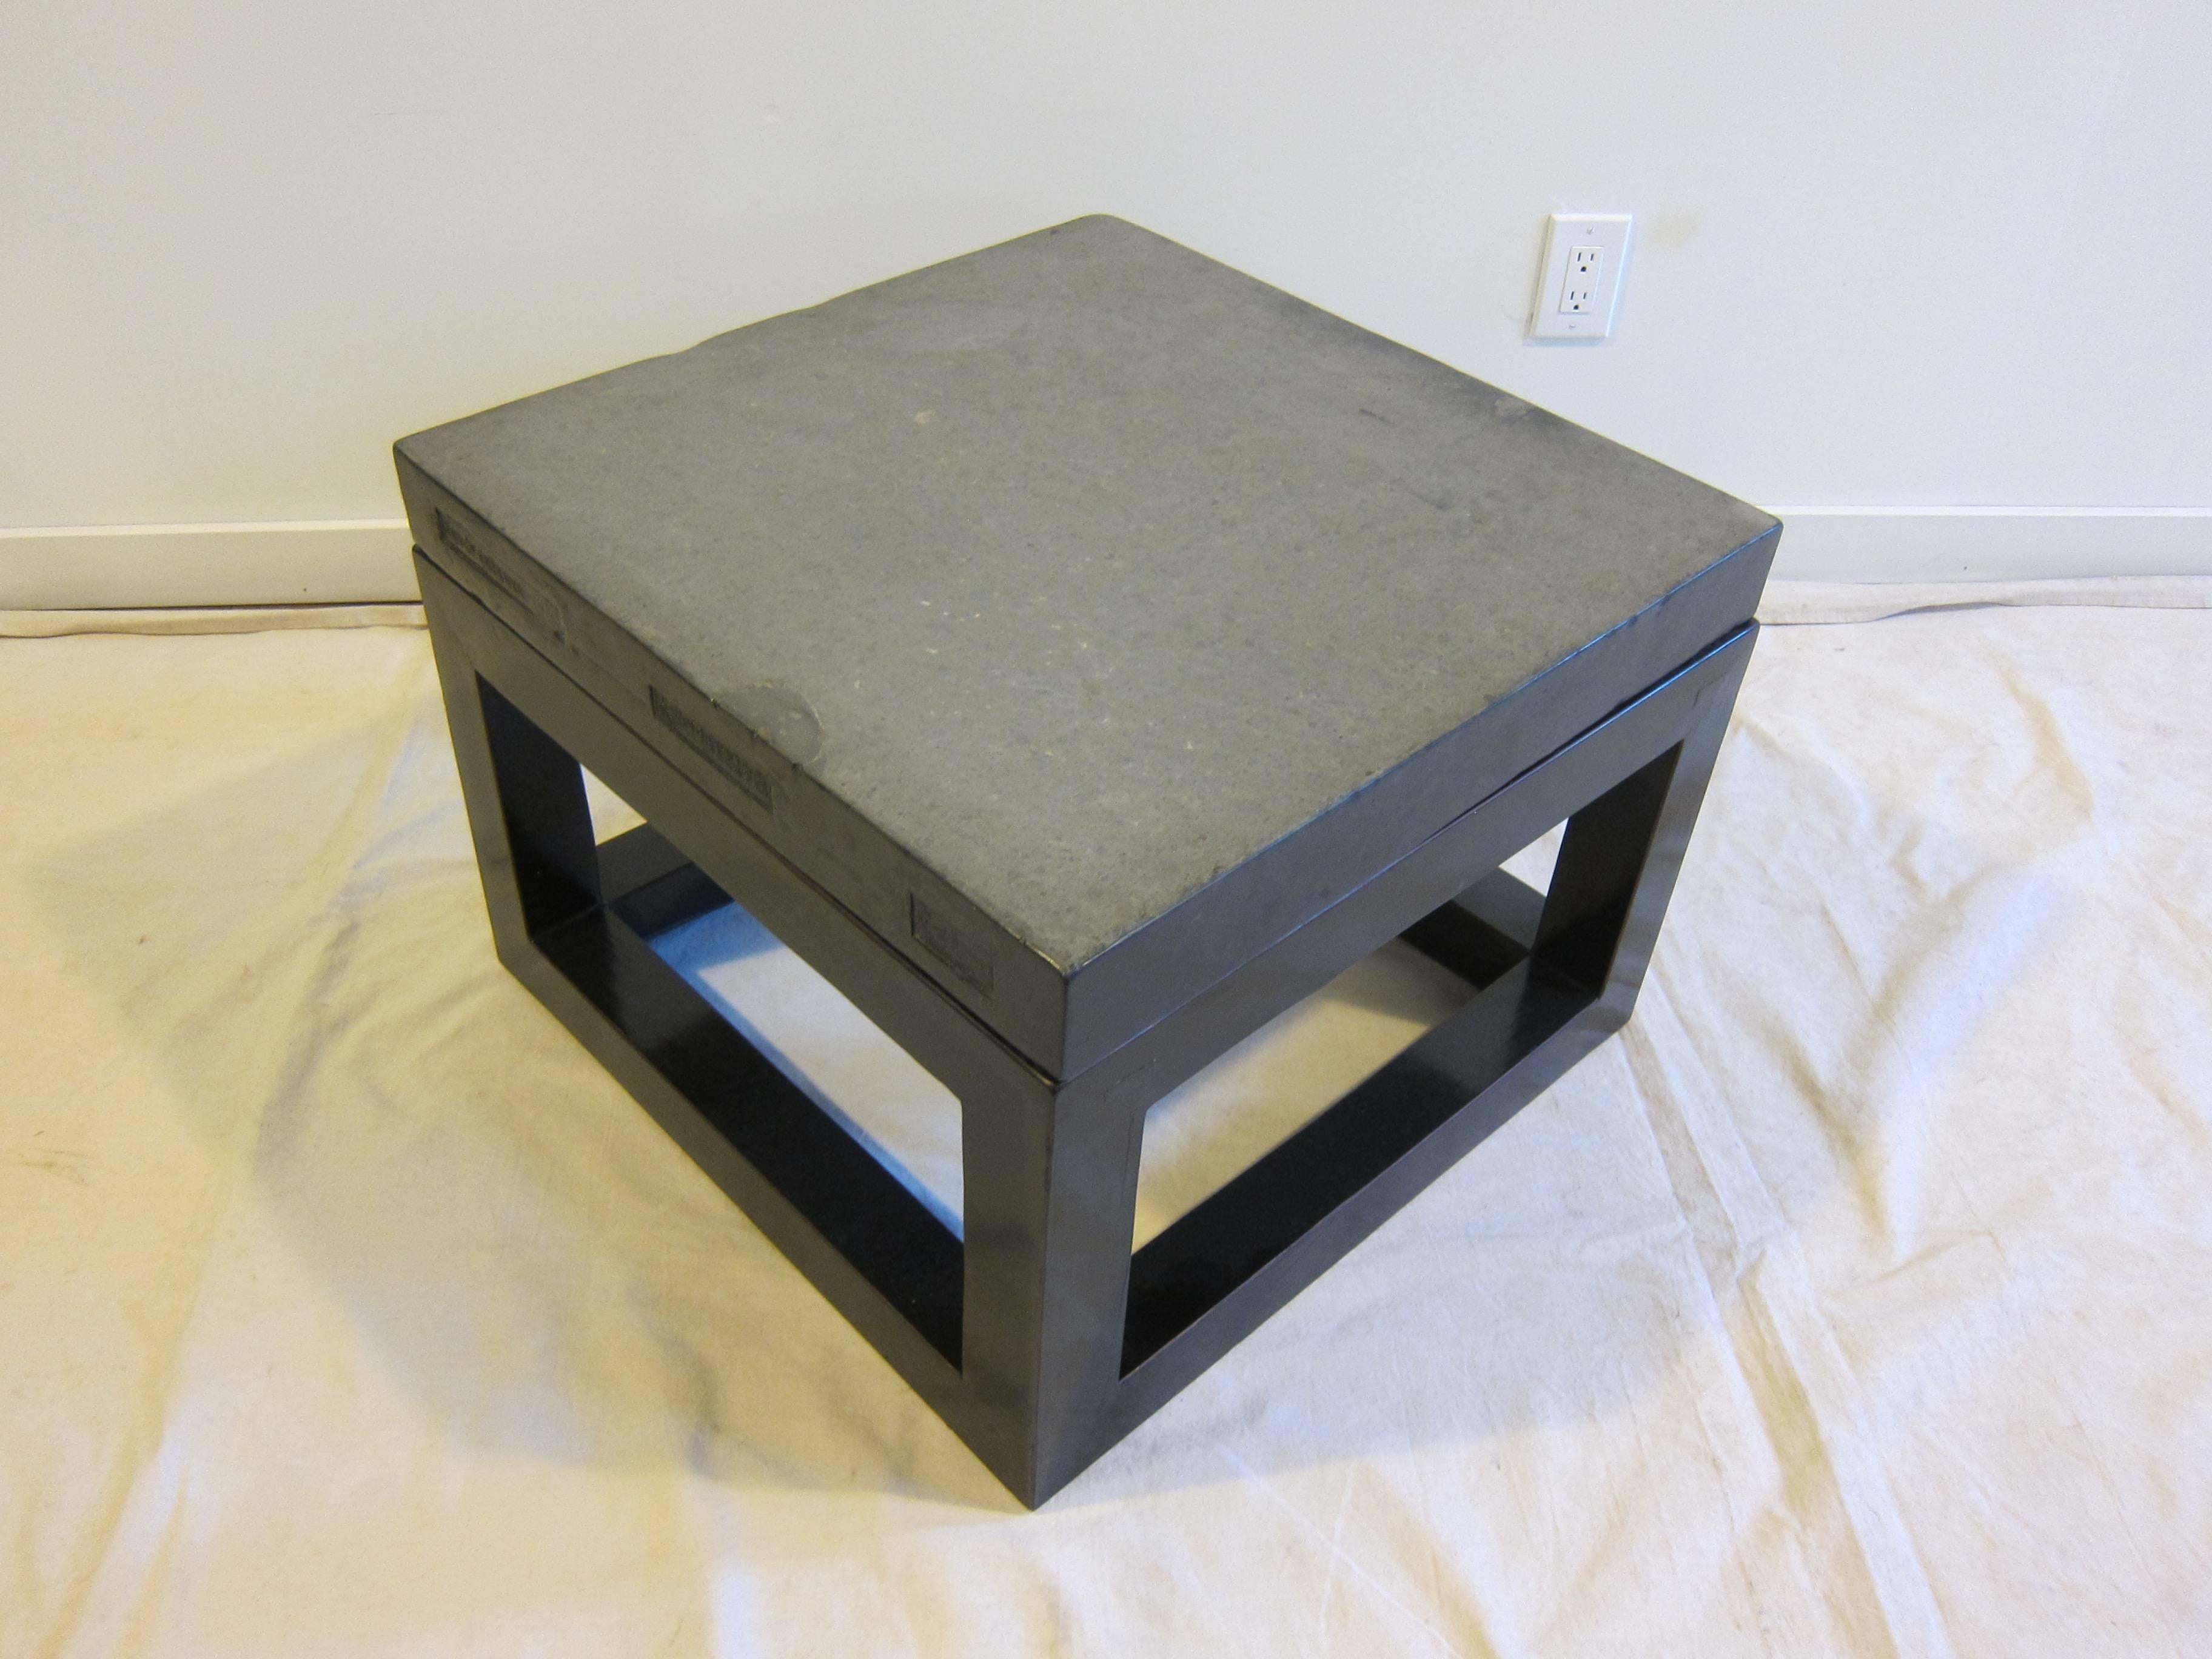 Chinese Ming style stone top table. Old floor stone with inscribed markings of Qing dynasty on elmwood black lacquer Table base.  The stone is inscribed with Chinese characters showing its history.  In very good condition.